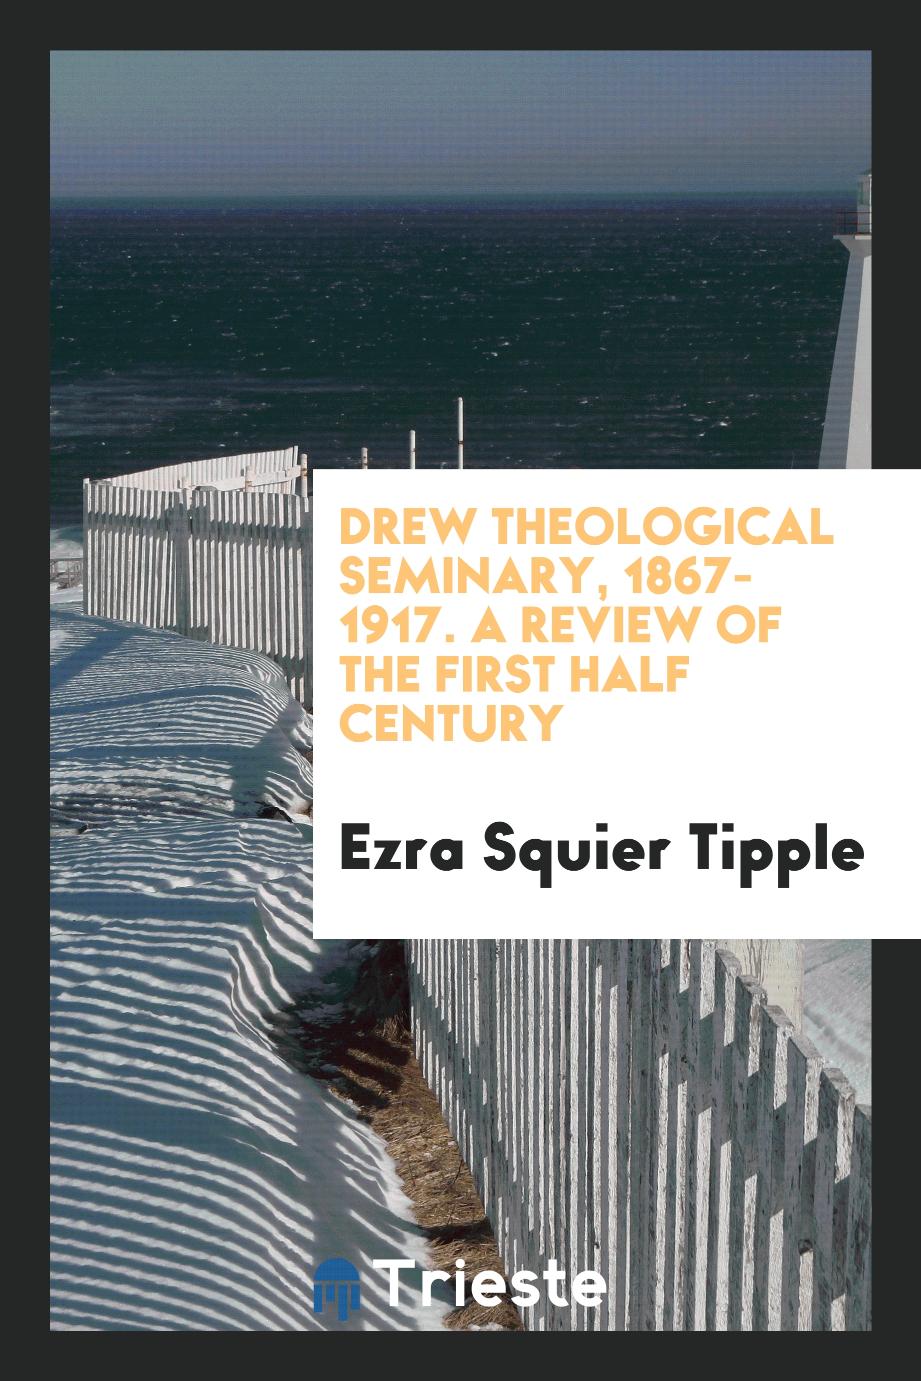 Drew Theological Seminary, 1867-1917. A Review of the First Half Century